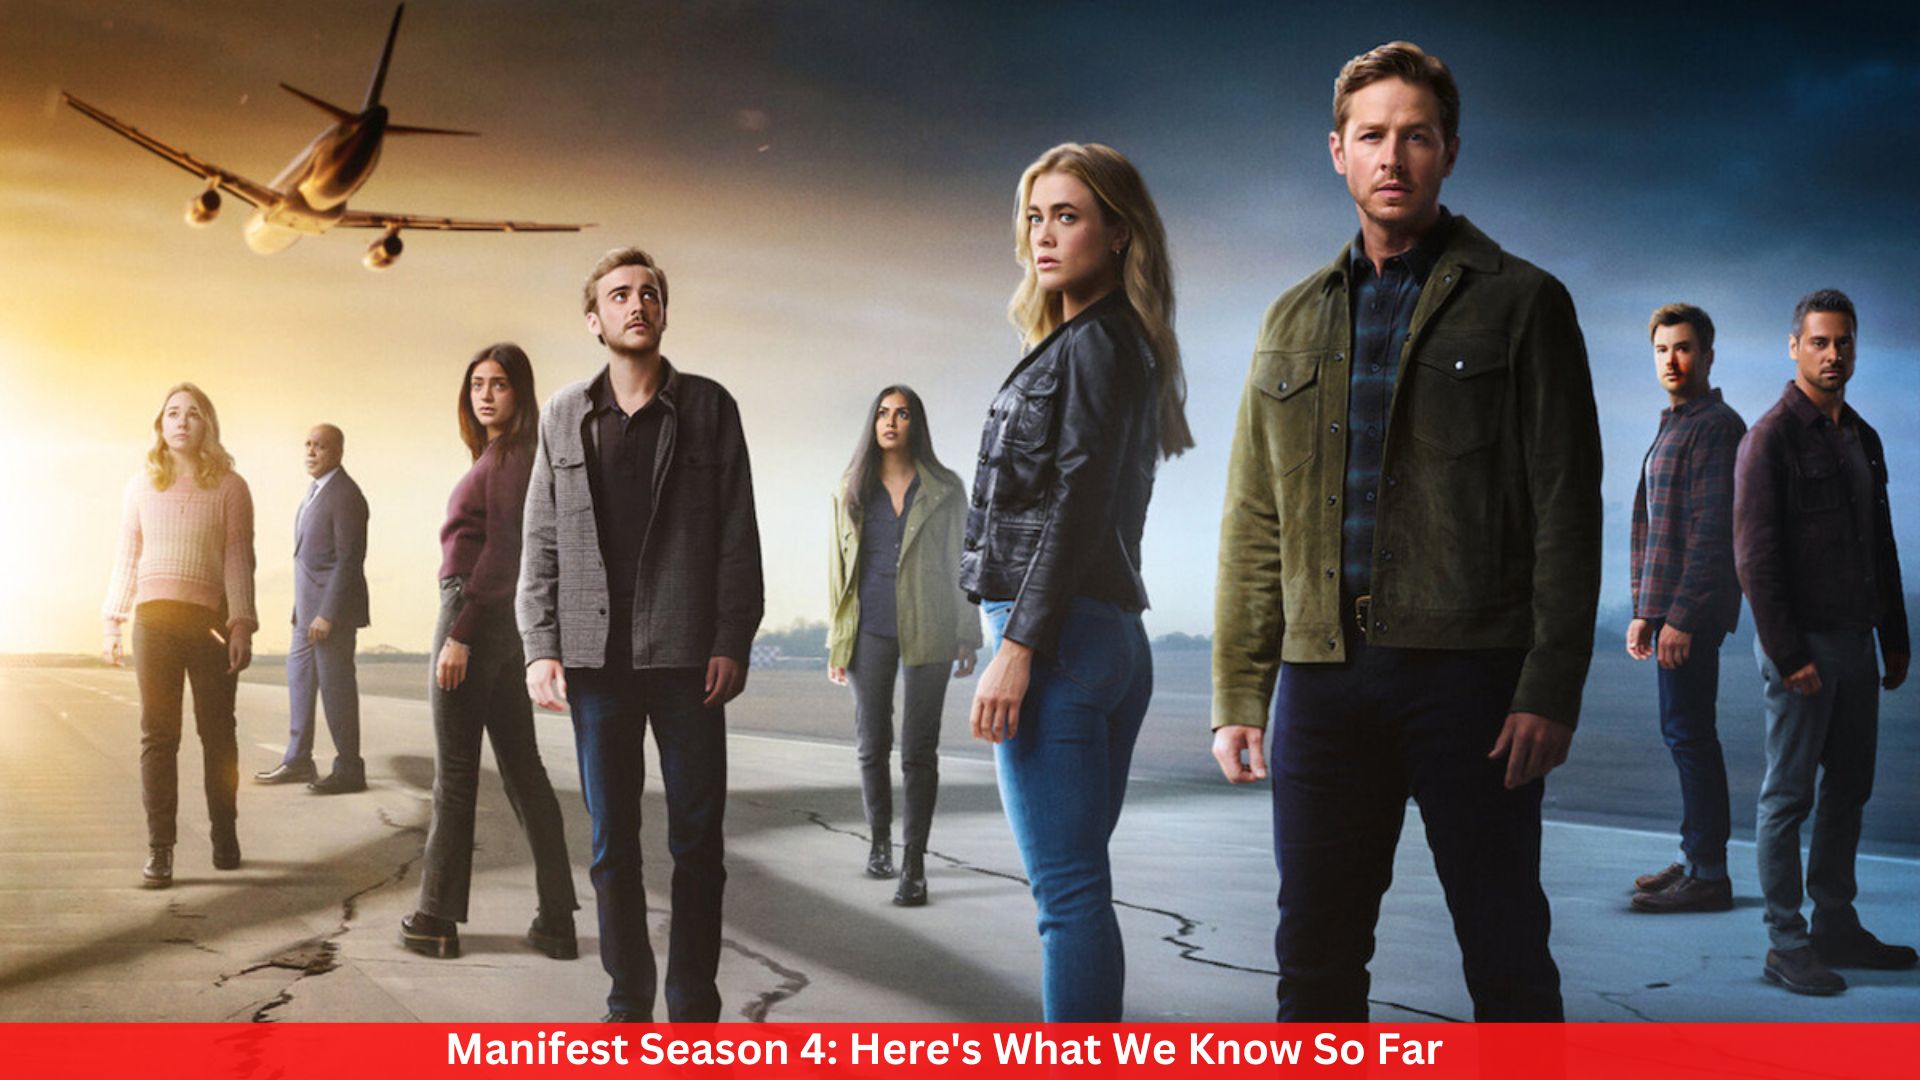 Manifest Season 4: Here's What We Know So Far